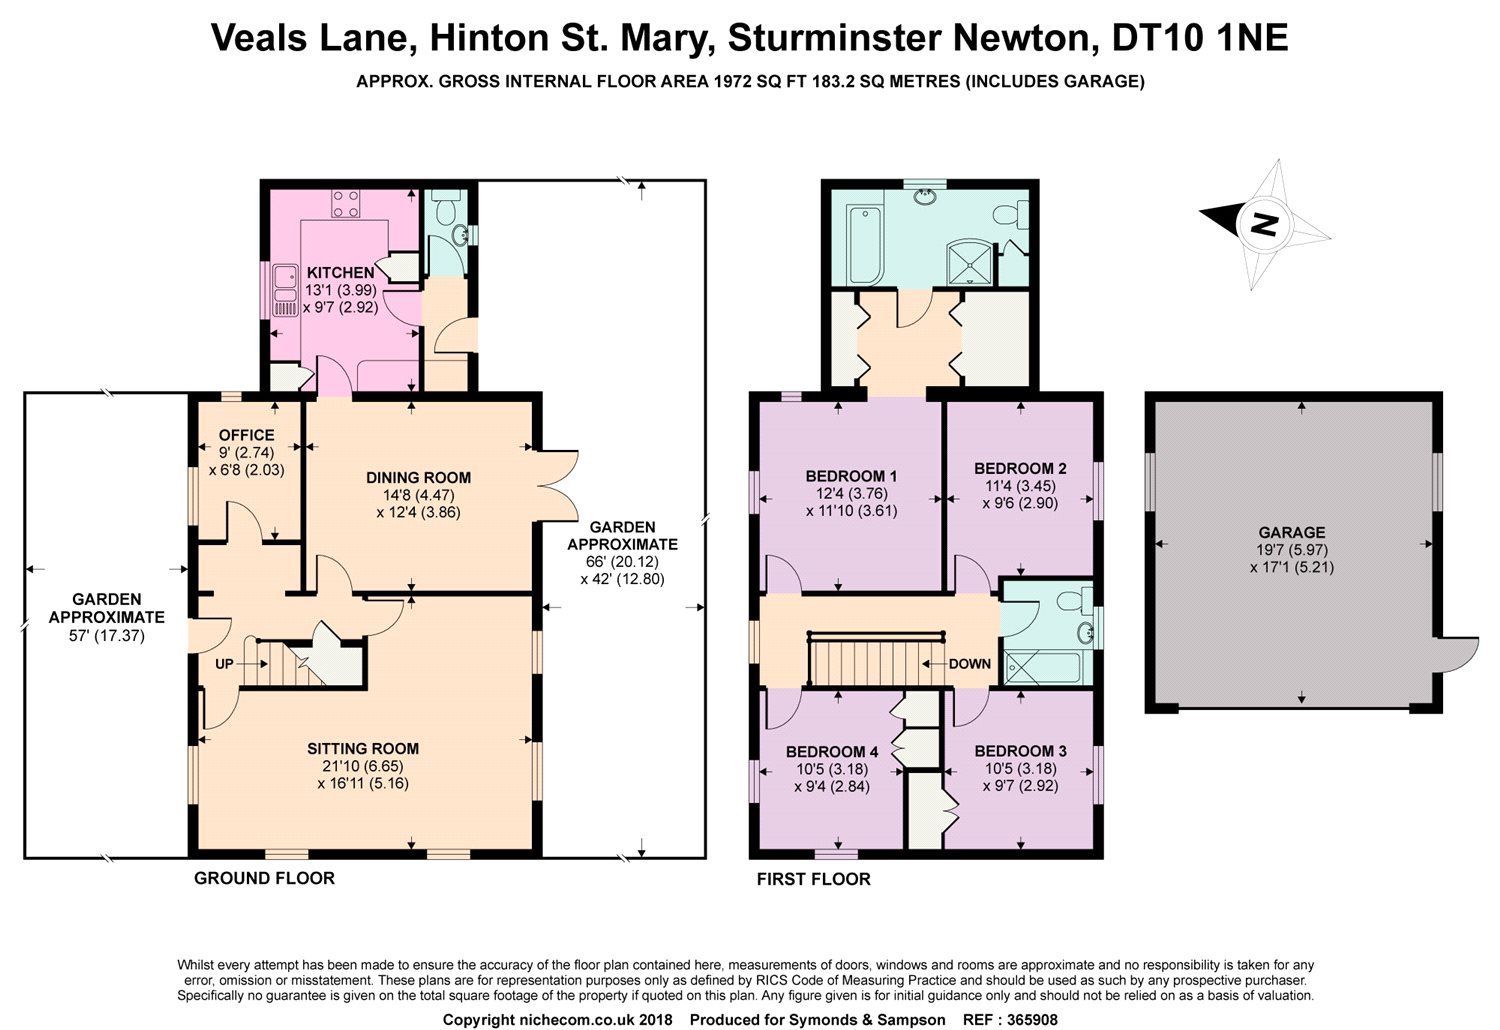 4 Bedrooms Detached house for sale in Veals Lane, Hinton St. Mary, Sturminster Newton DT10